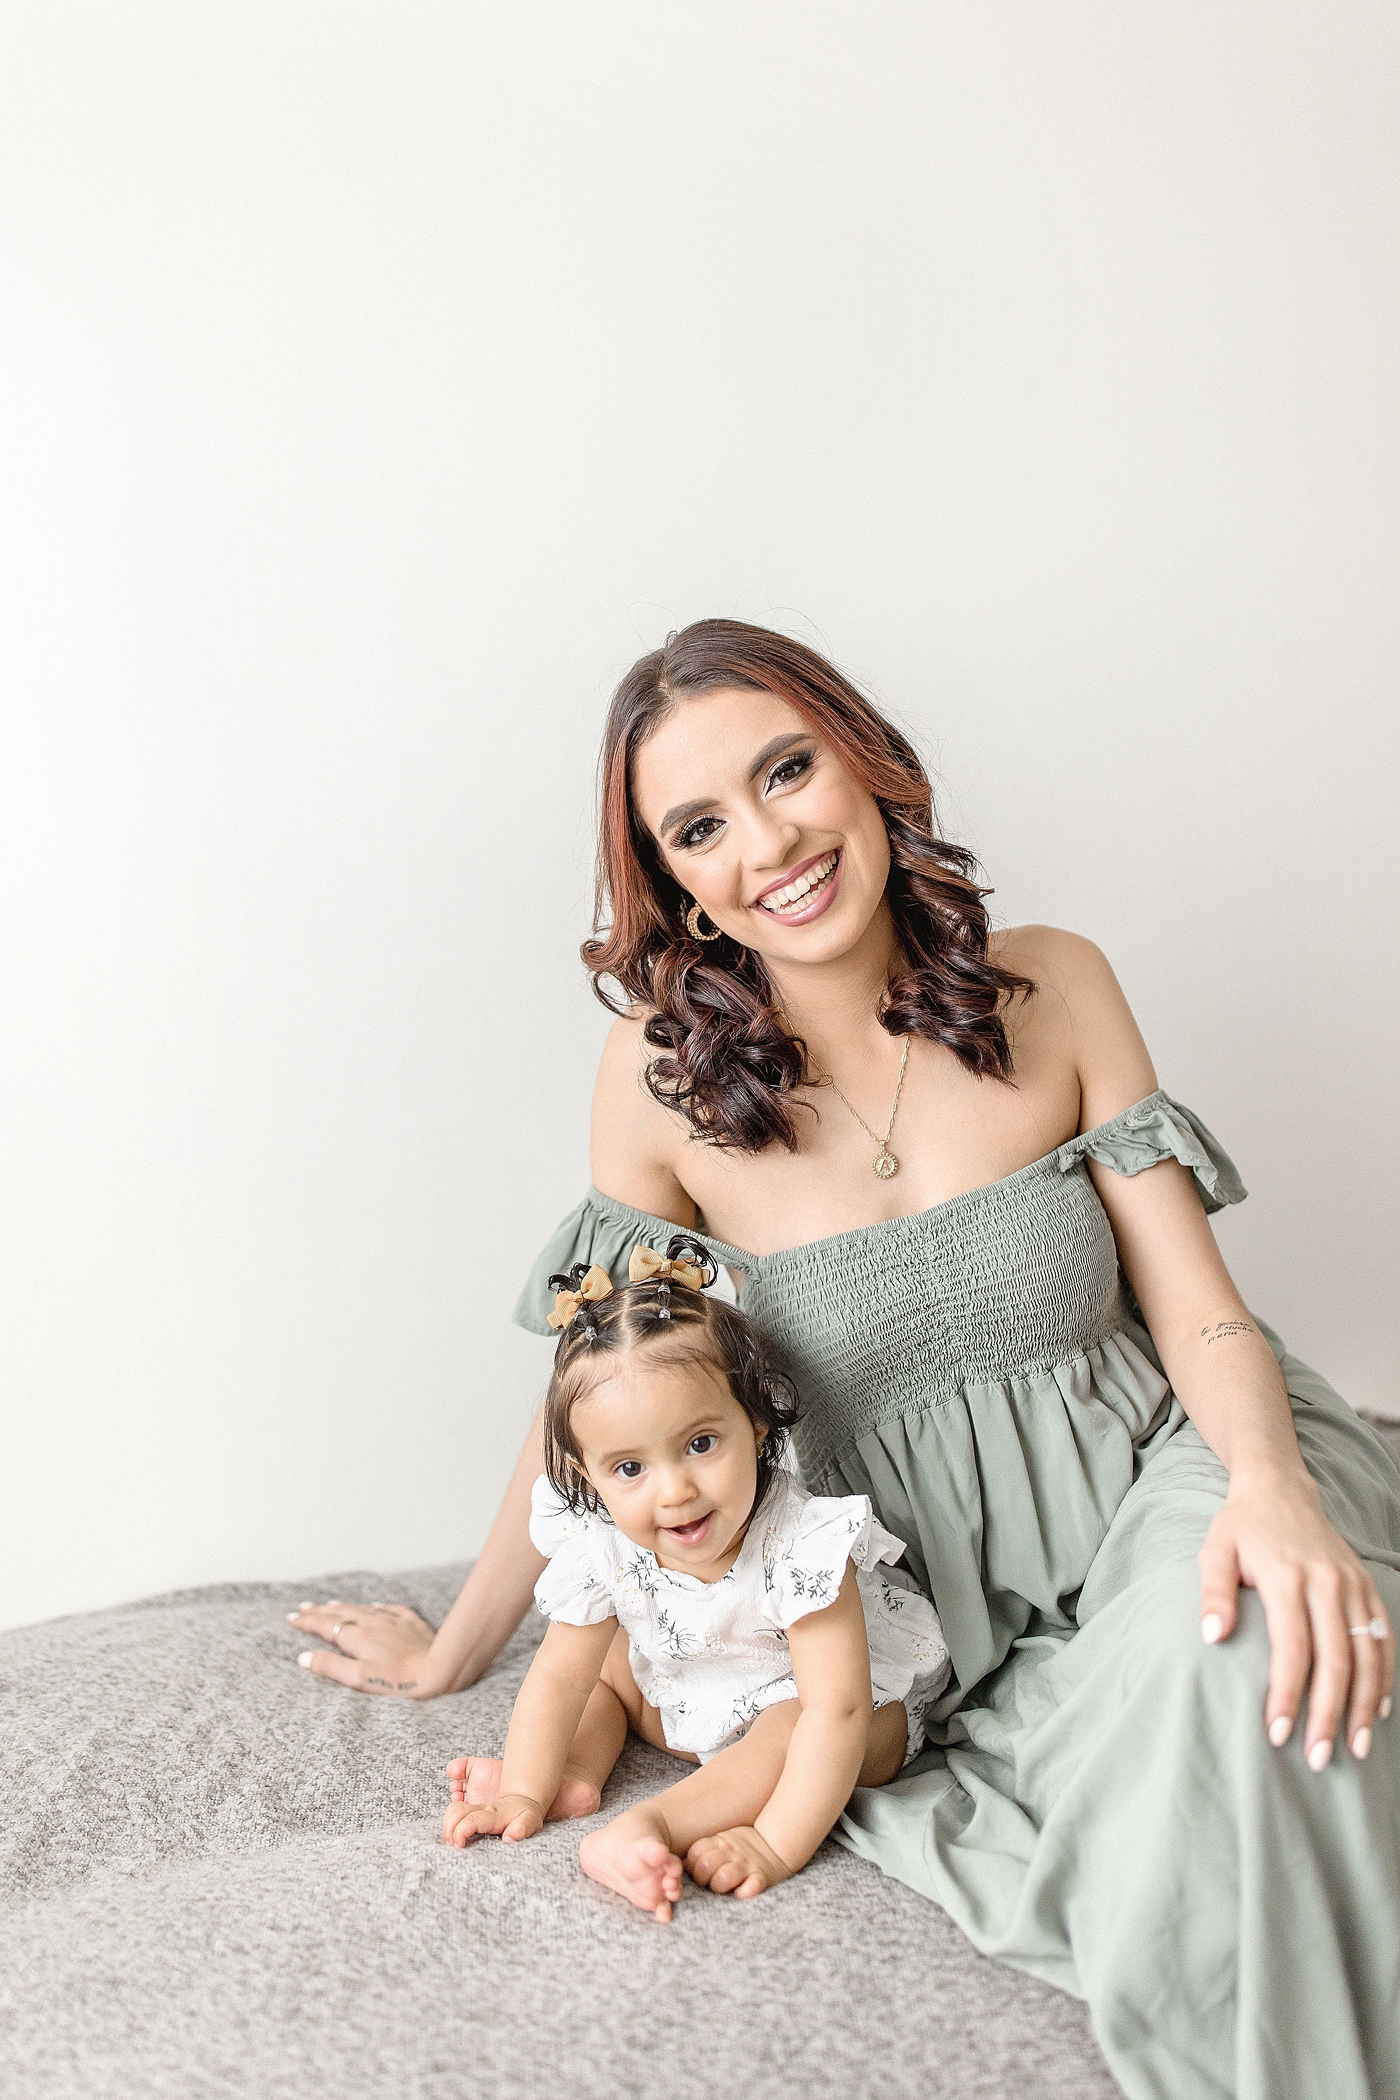 Mom and baby girl sit on bench smiling during baby photography miami session. Photo by Ivanna Vidal Photography.